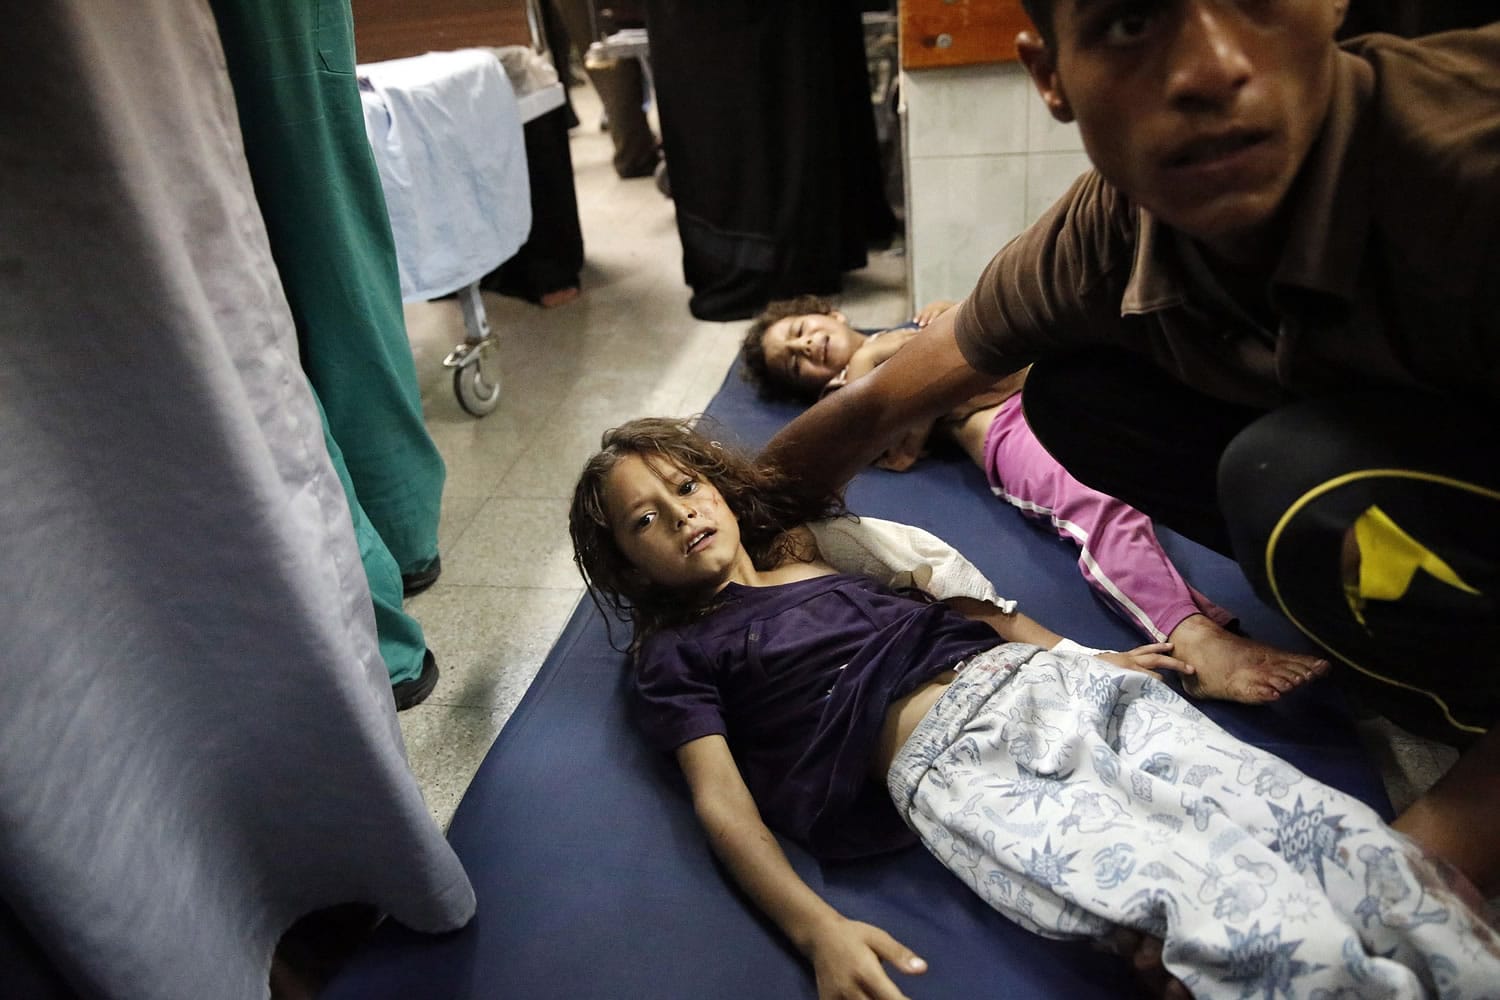 Palestinian children, wounded during fighting between Israeli forces and Hamas militants in Beit Hanoun, northern Gaza Strip, are treated on the floor of an emergency room Thursday at the Kamal Adwan hospital in Beit Lahiya.